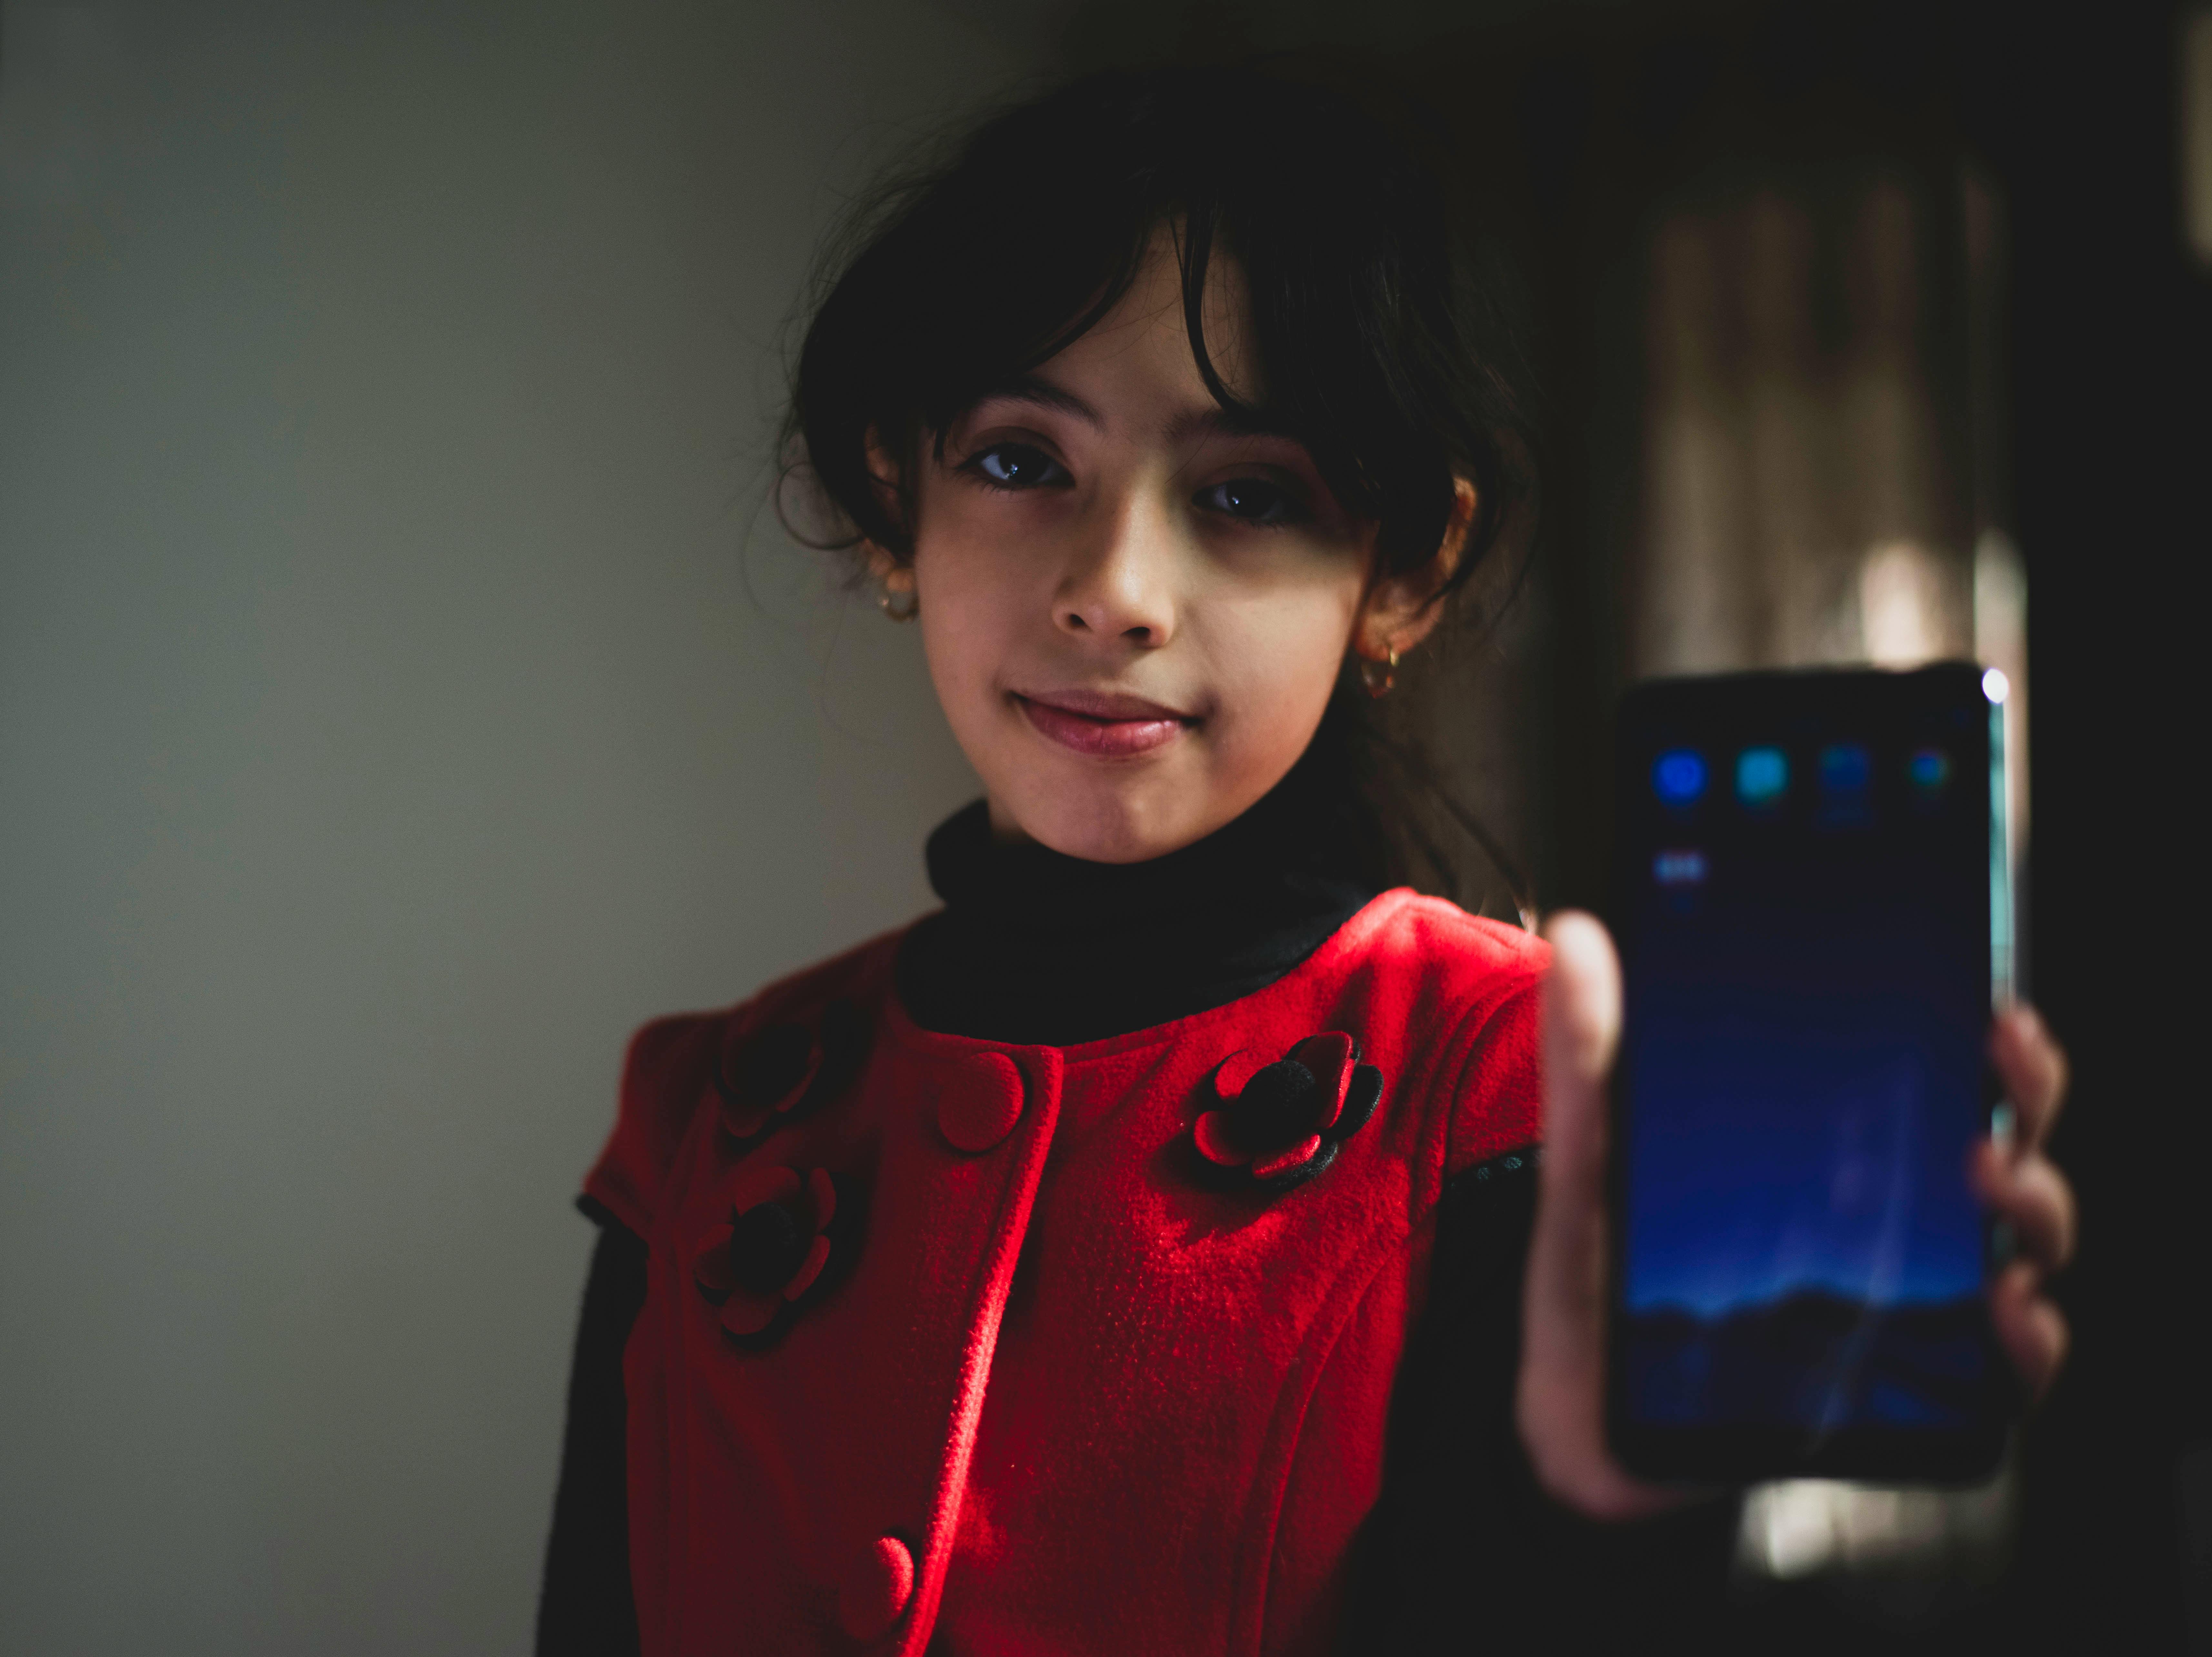 girl wearing red and black top holding smartphone